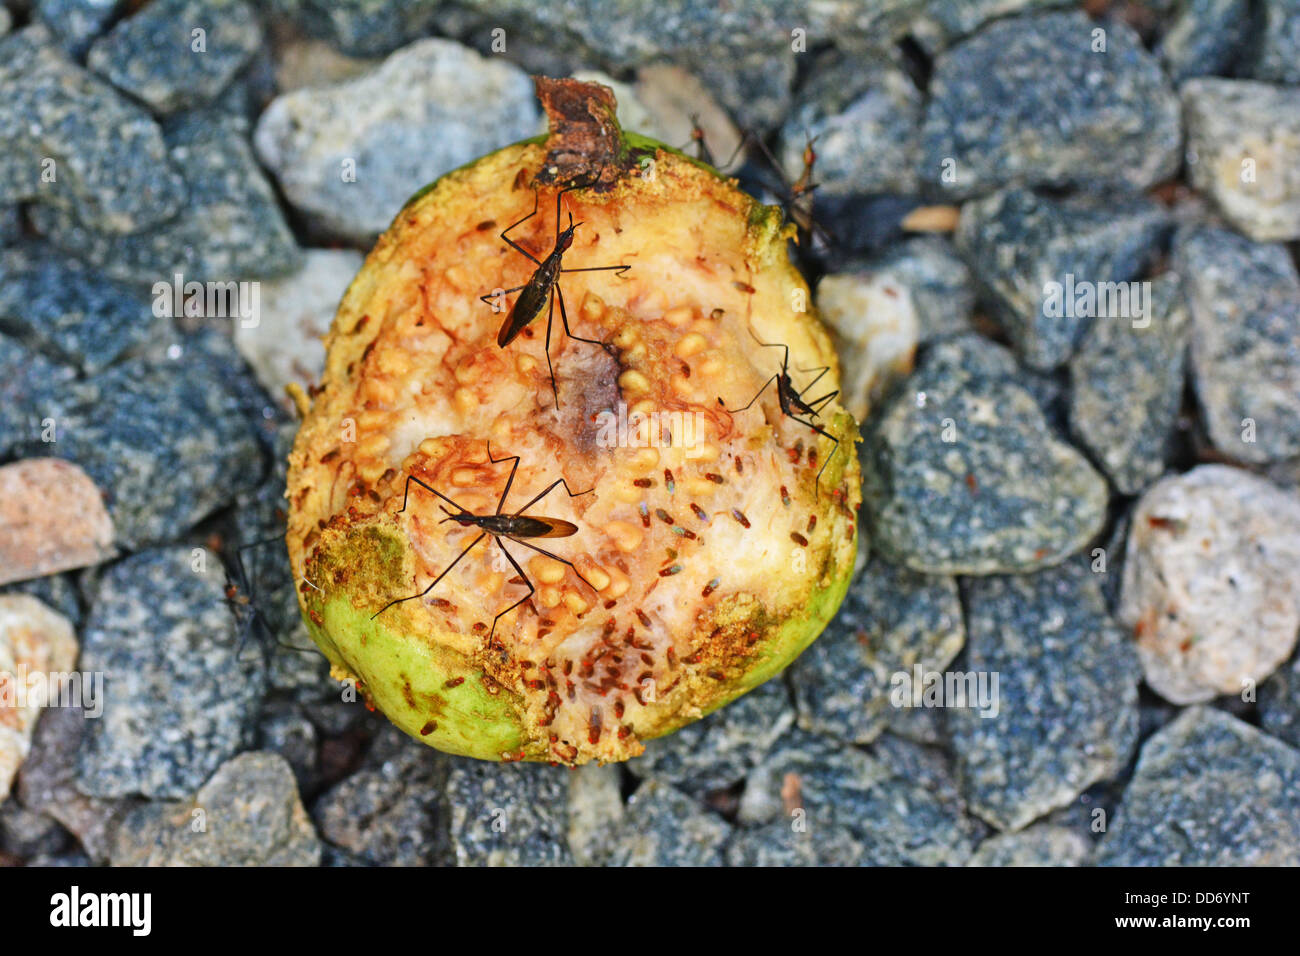 A fallen guava fruit covered with fruit flies Stock Photo